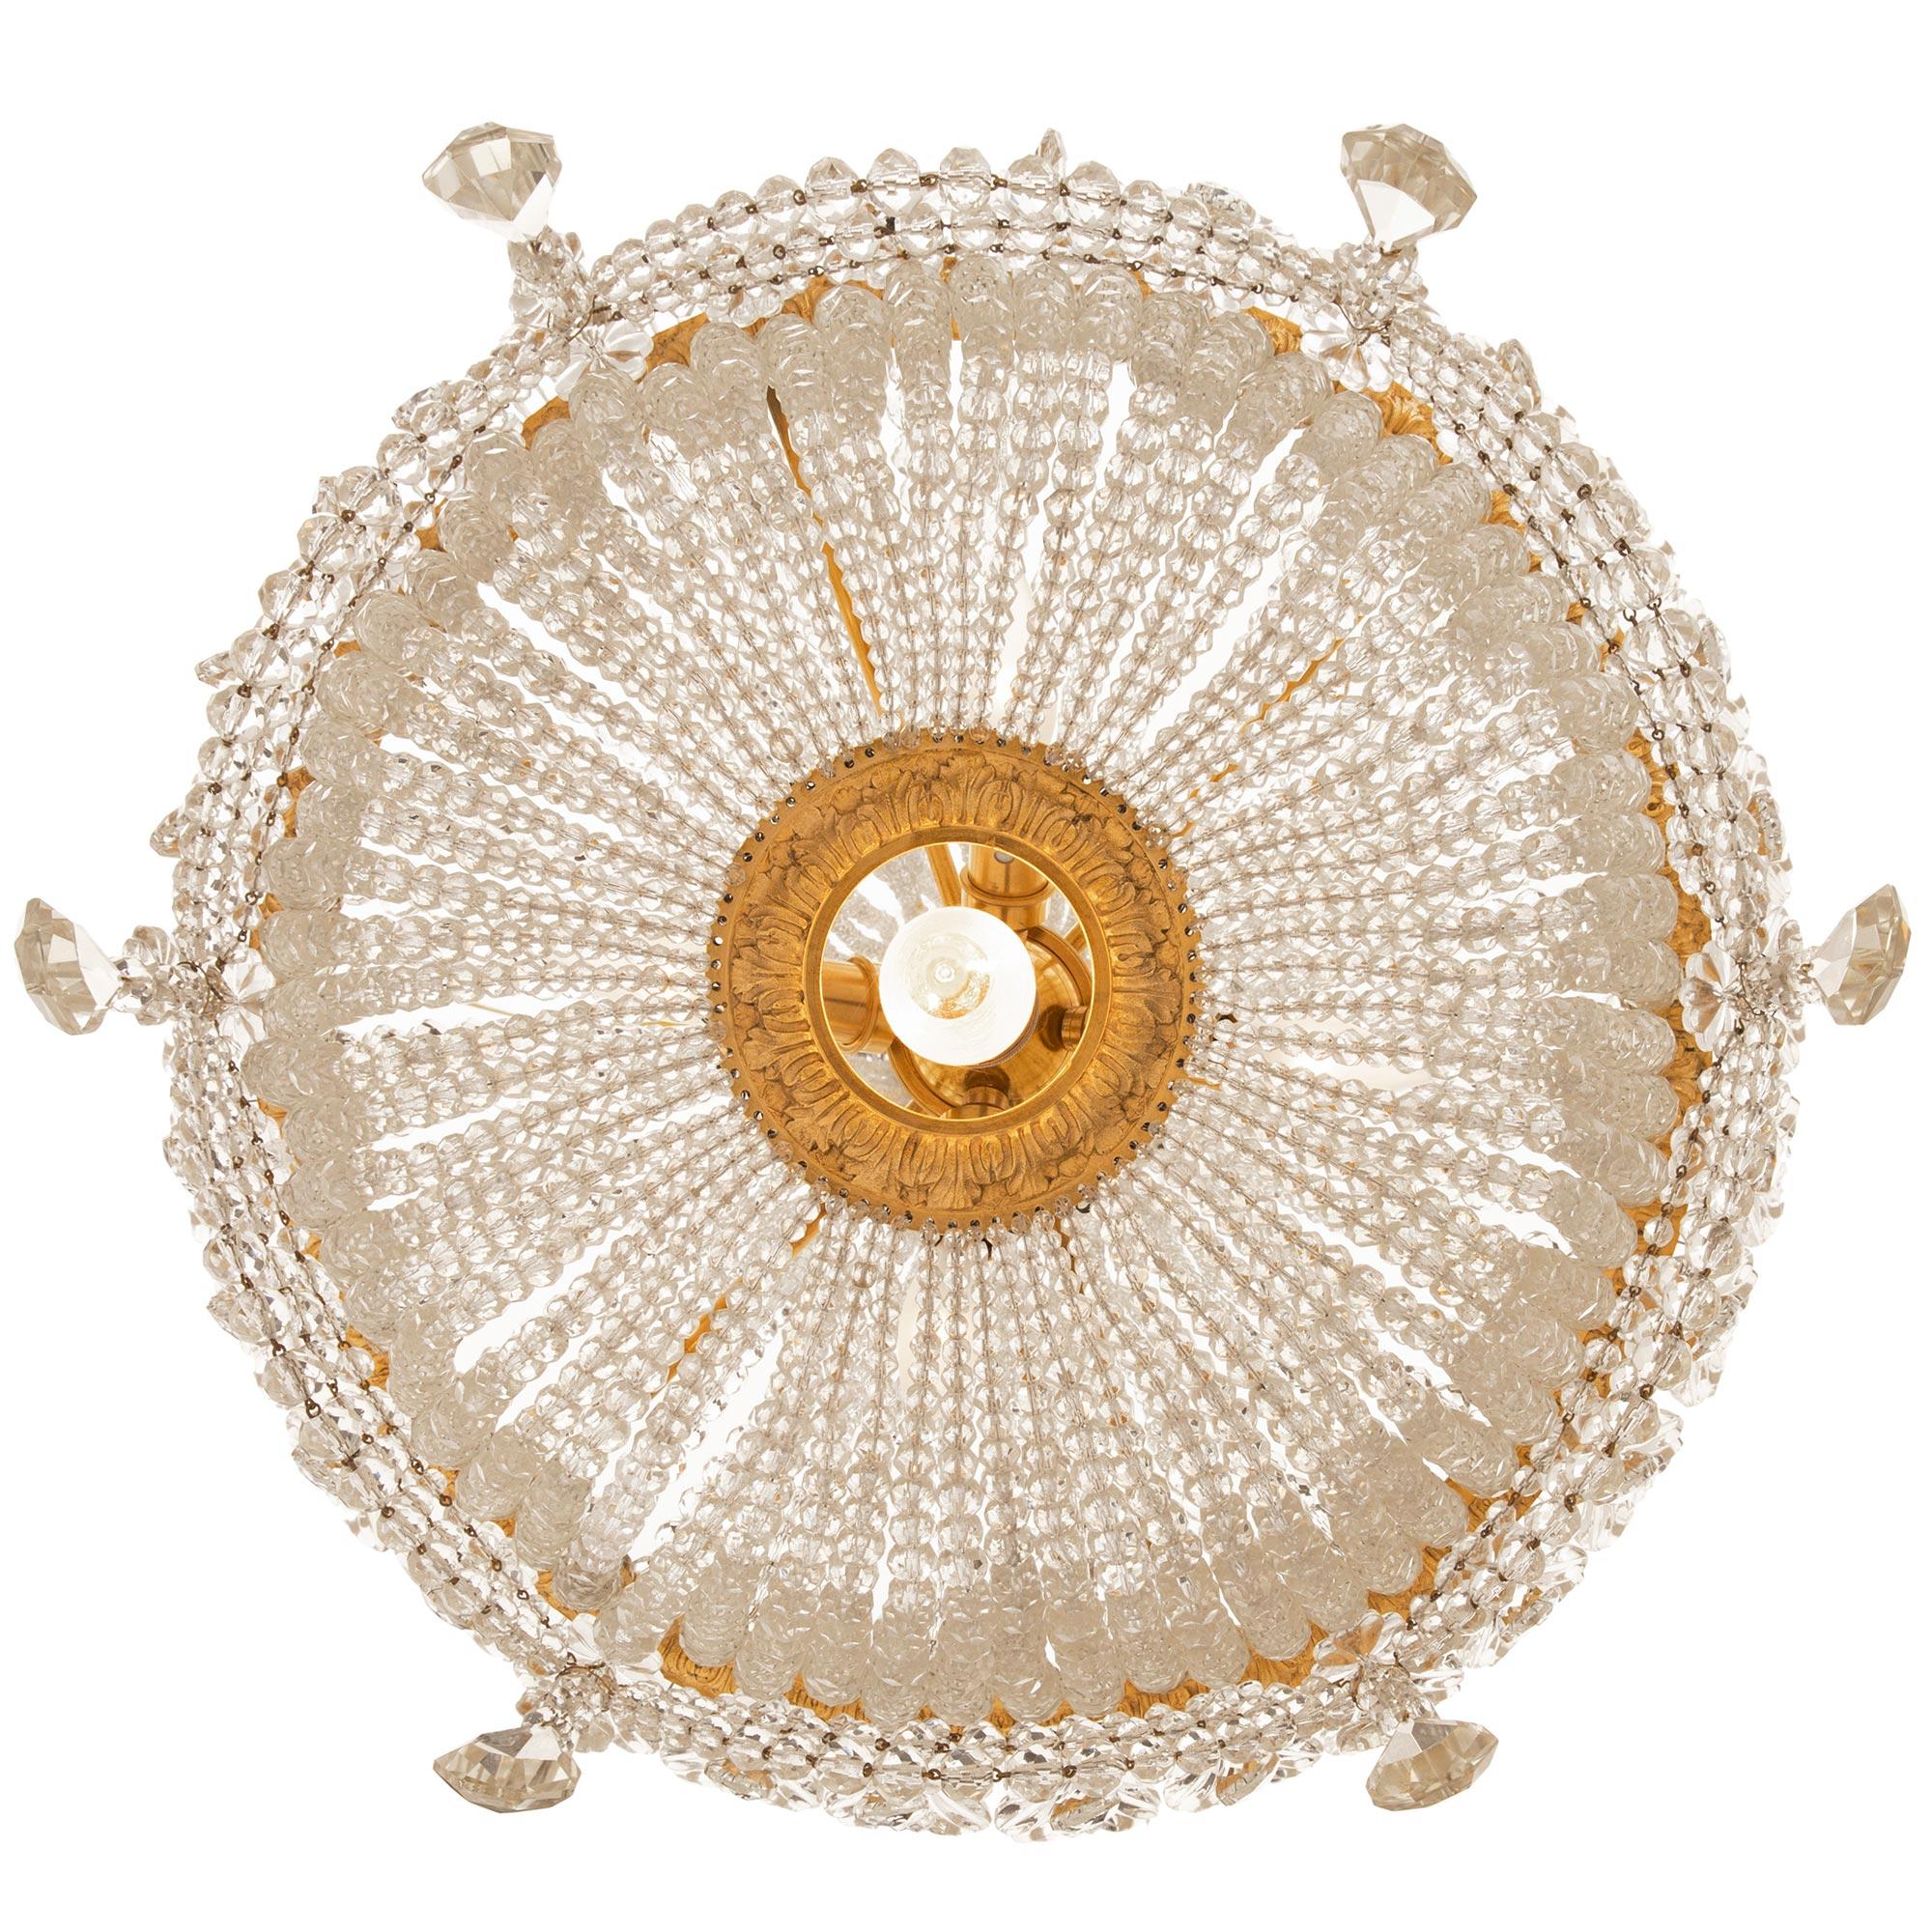 A stunning and extremely decorative French 19th century Louis XVI st. Belle Époque period Baccarat crystal and ormolu chandelier. The seven light chandelier is centered by a unique hanging central light bulb surrounded by a lovely richly chased wrap